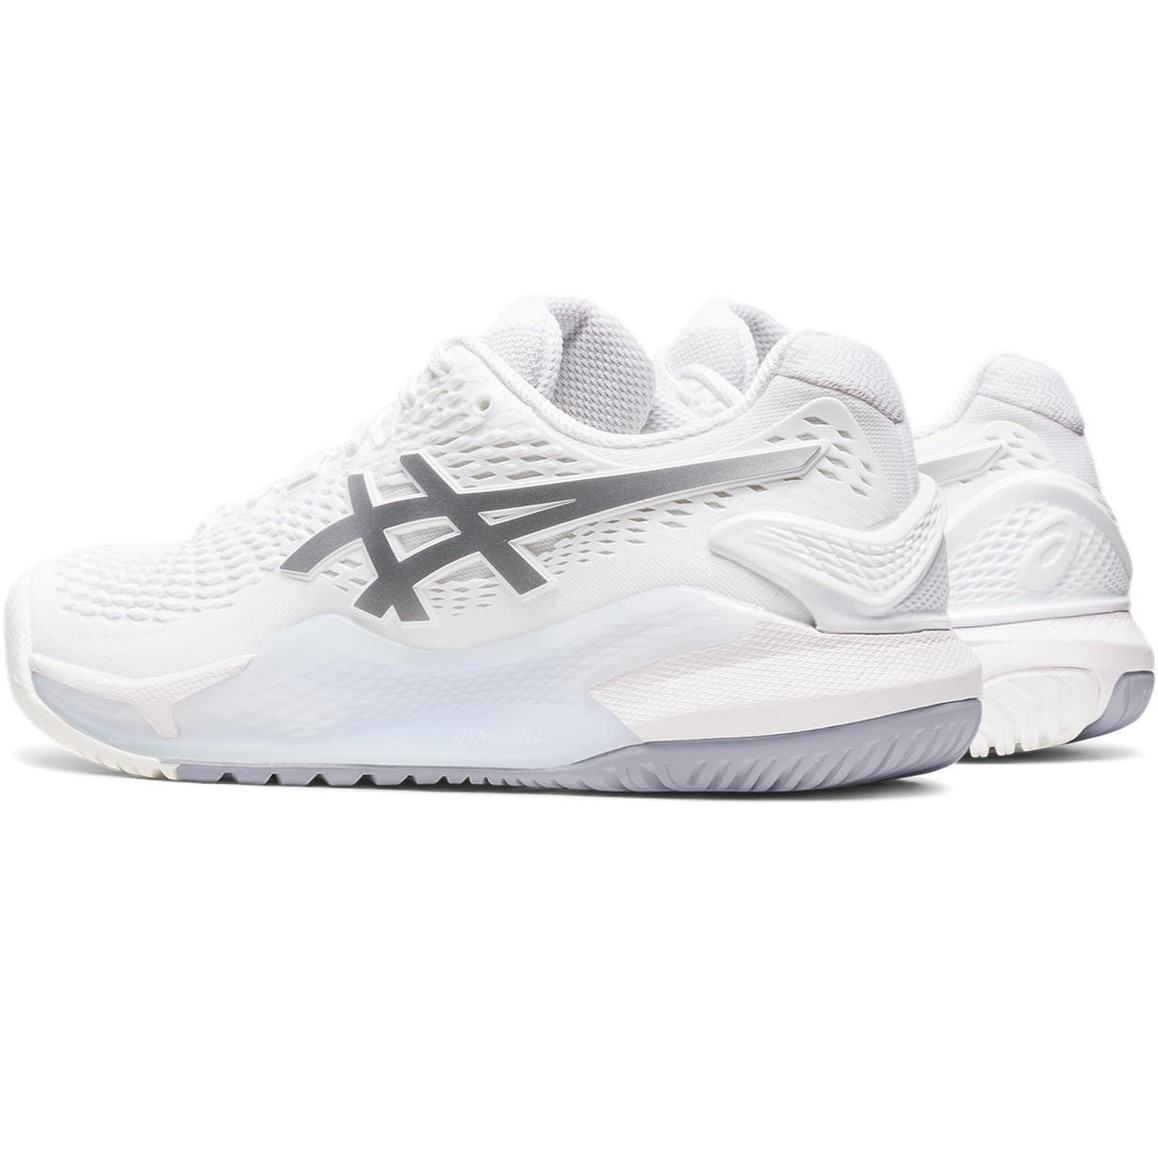 GIÀY CHAY BỘ ASICS NỮ GEL-RESOLUTION 9 WOMENS TENNIS SHOES WHITE PURE SILVER 1042A208-100 9